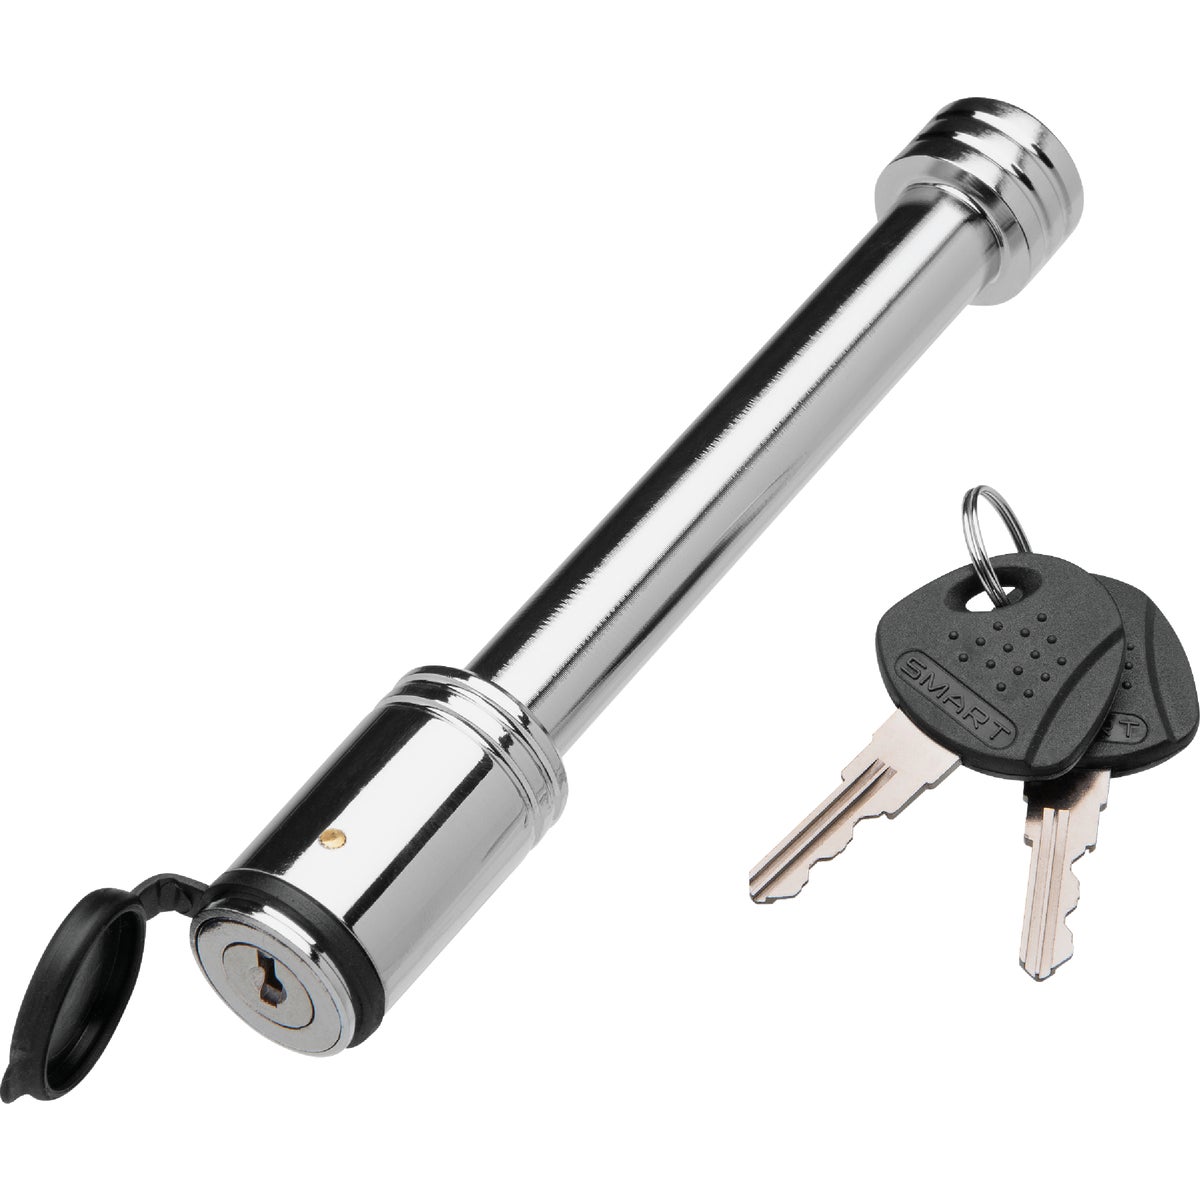 Item 570239, The Class V Barrel Style Receiver Lock protects your boats, campers, 